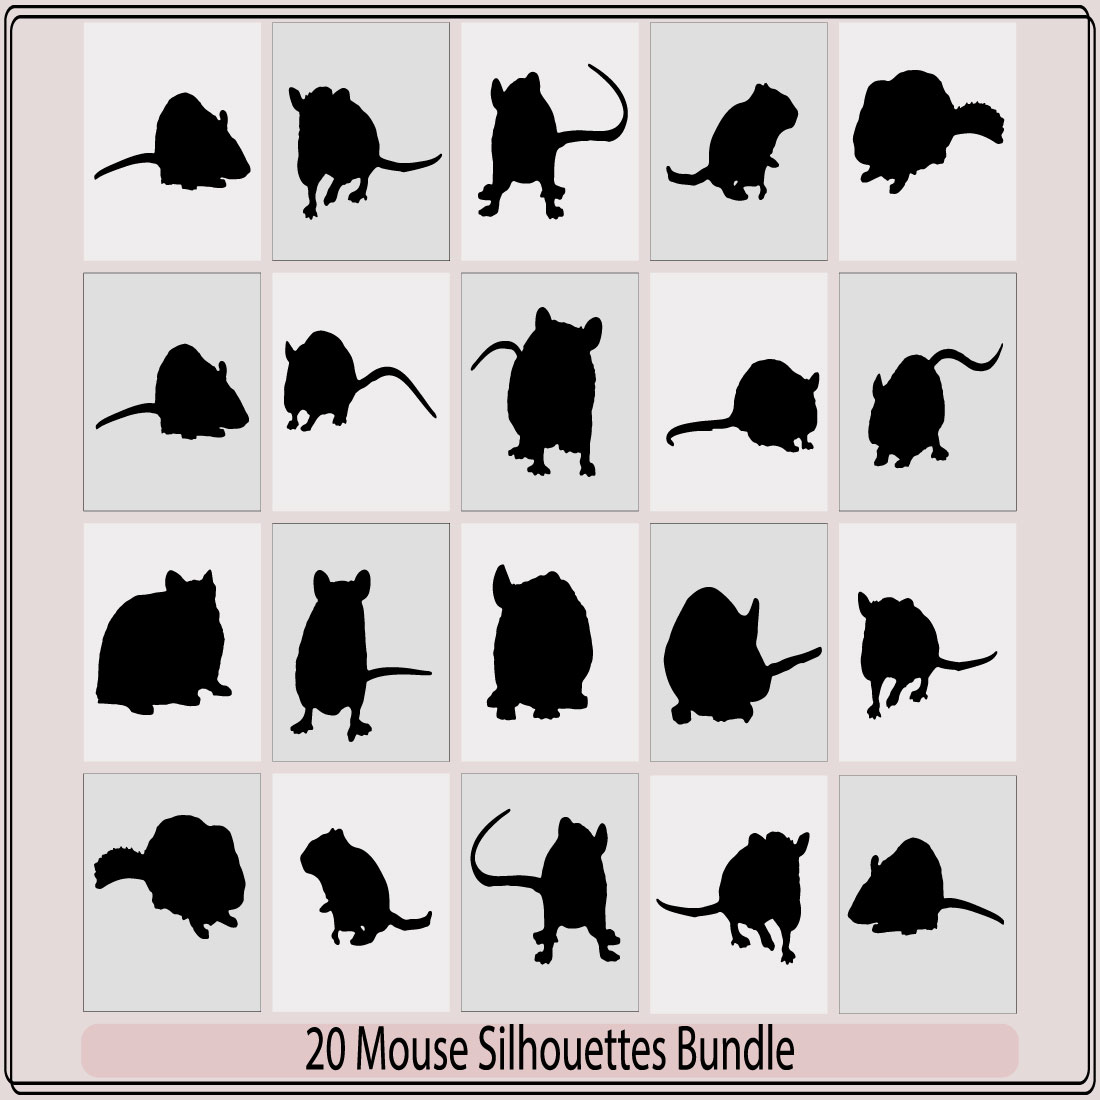 Rat and mouse silhouette,silhouette of a realistic rat,vector silhouette of the mouse,Mice Silhouettes,set of silhouettes Mouse Rat preview image.